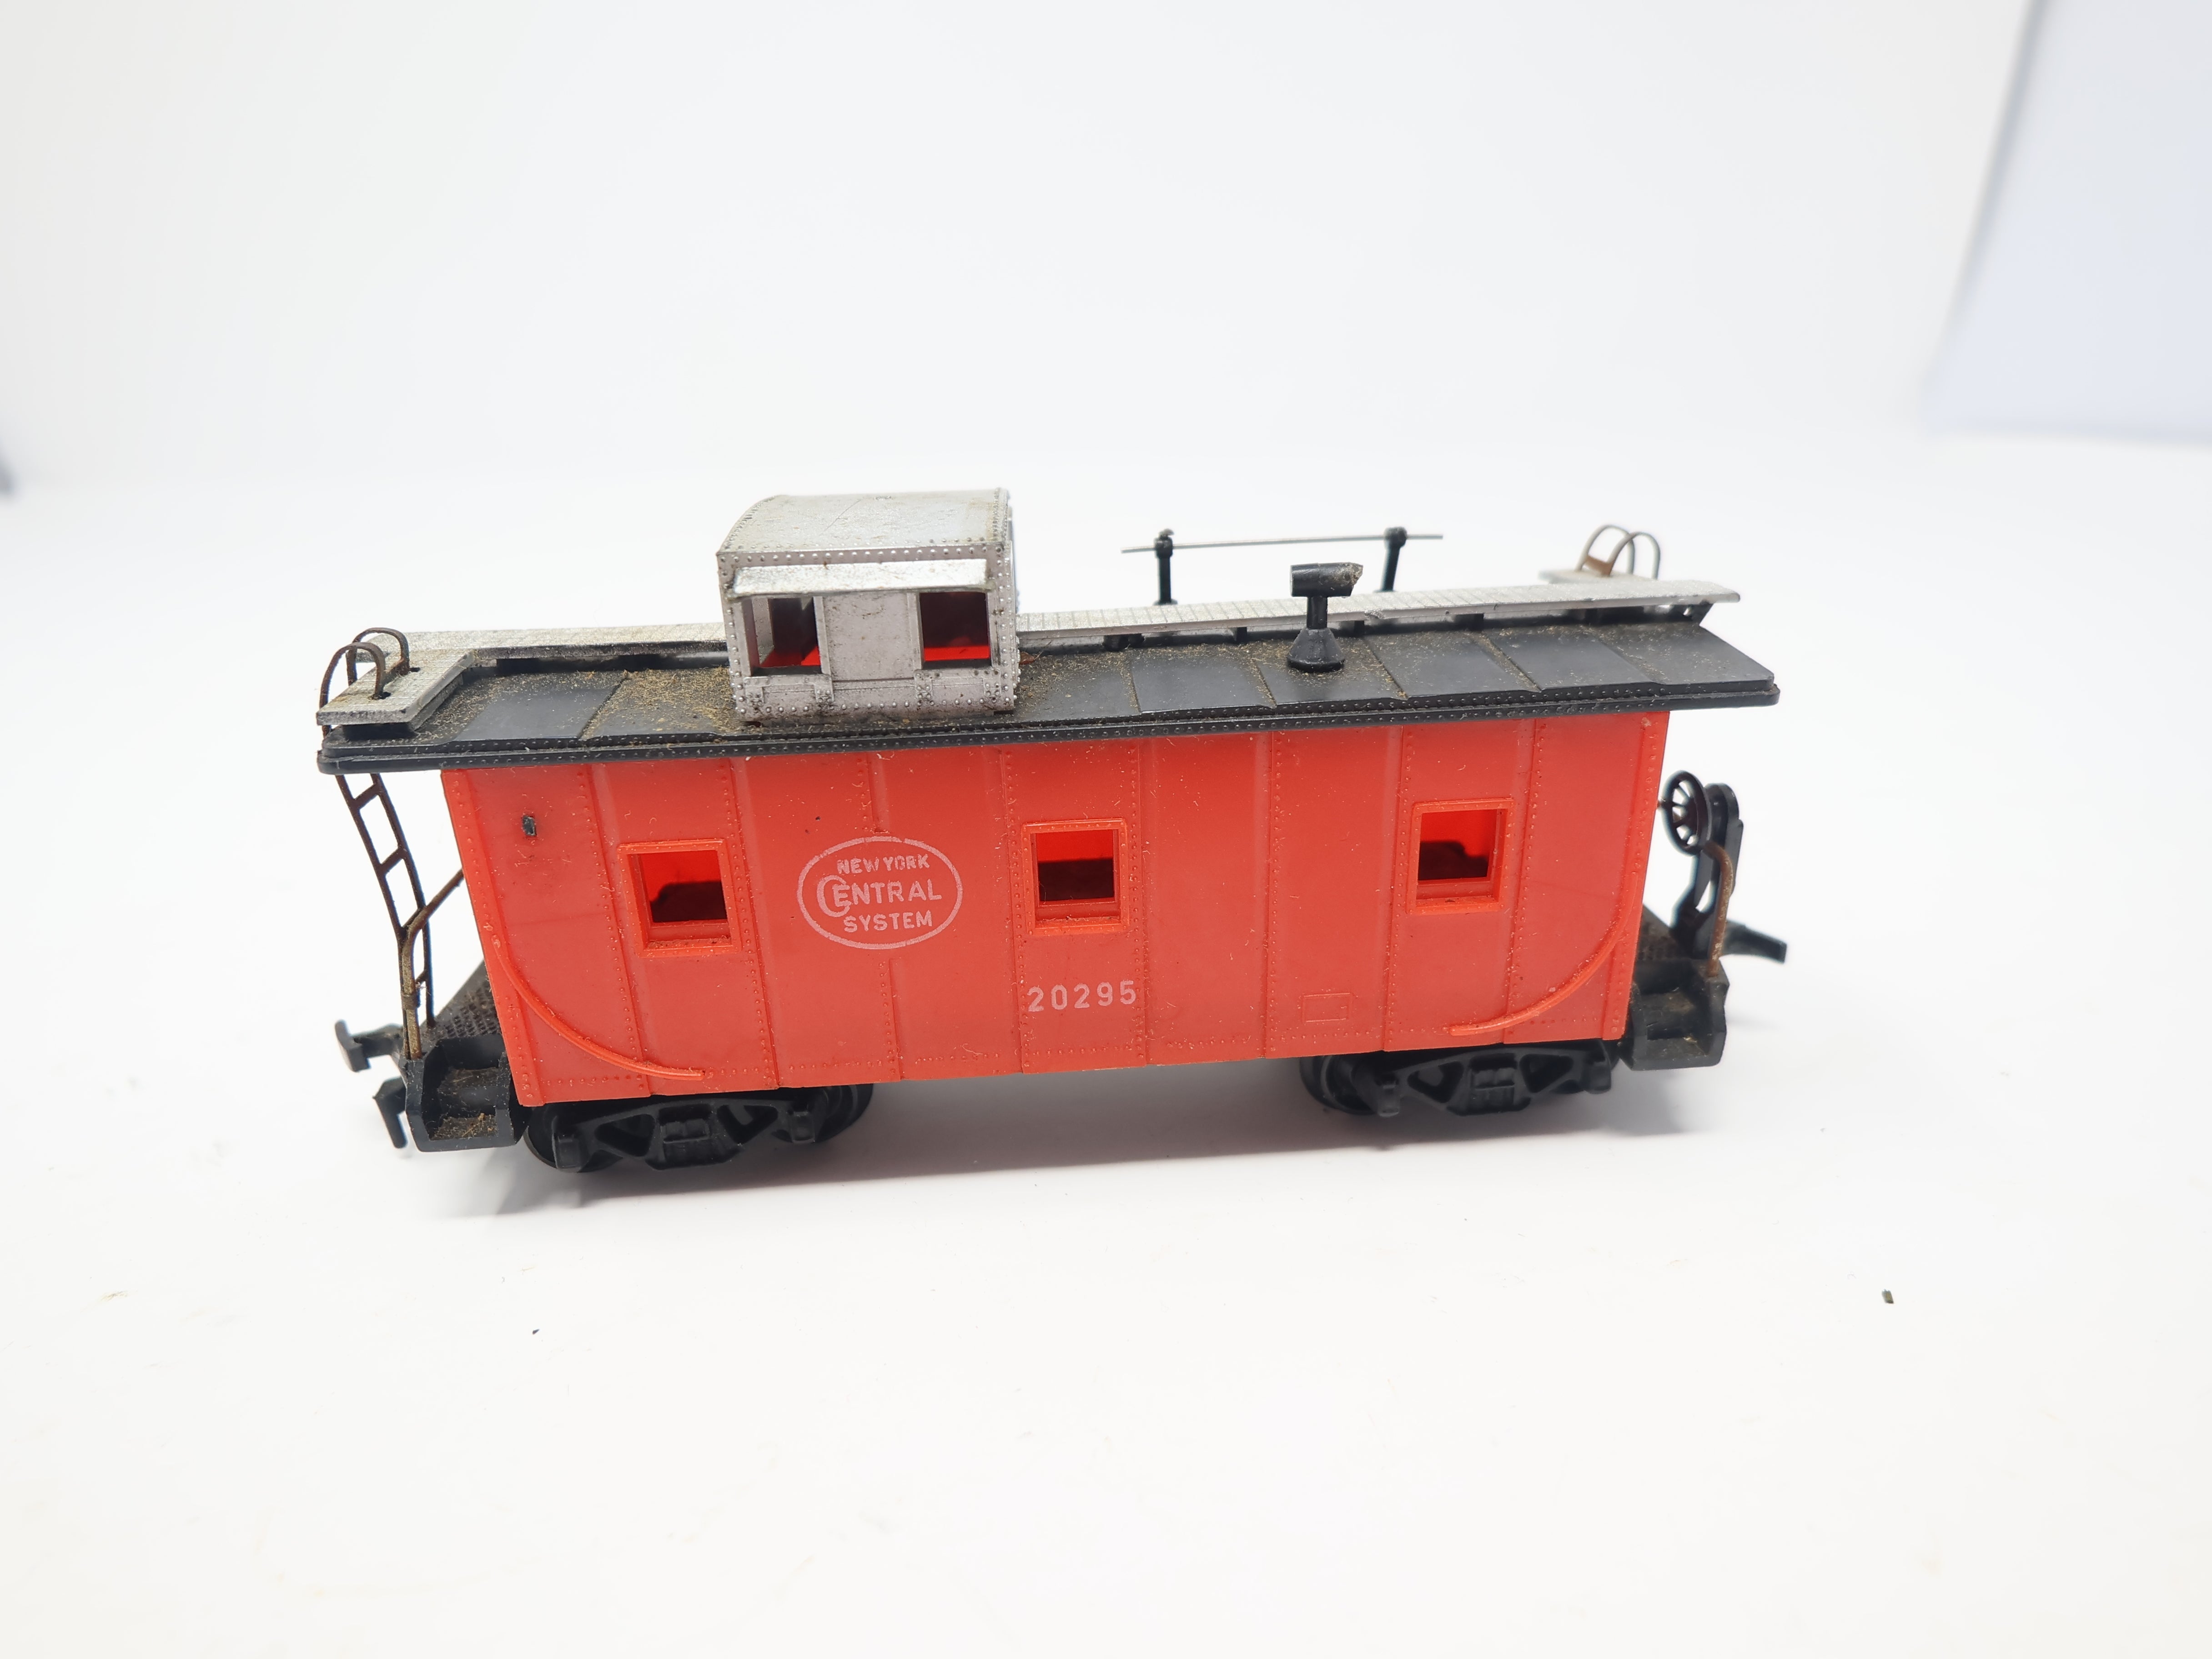 USED MARX HO Scale, Caboose, New York Central #20295